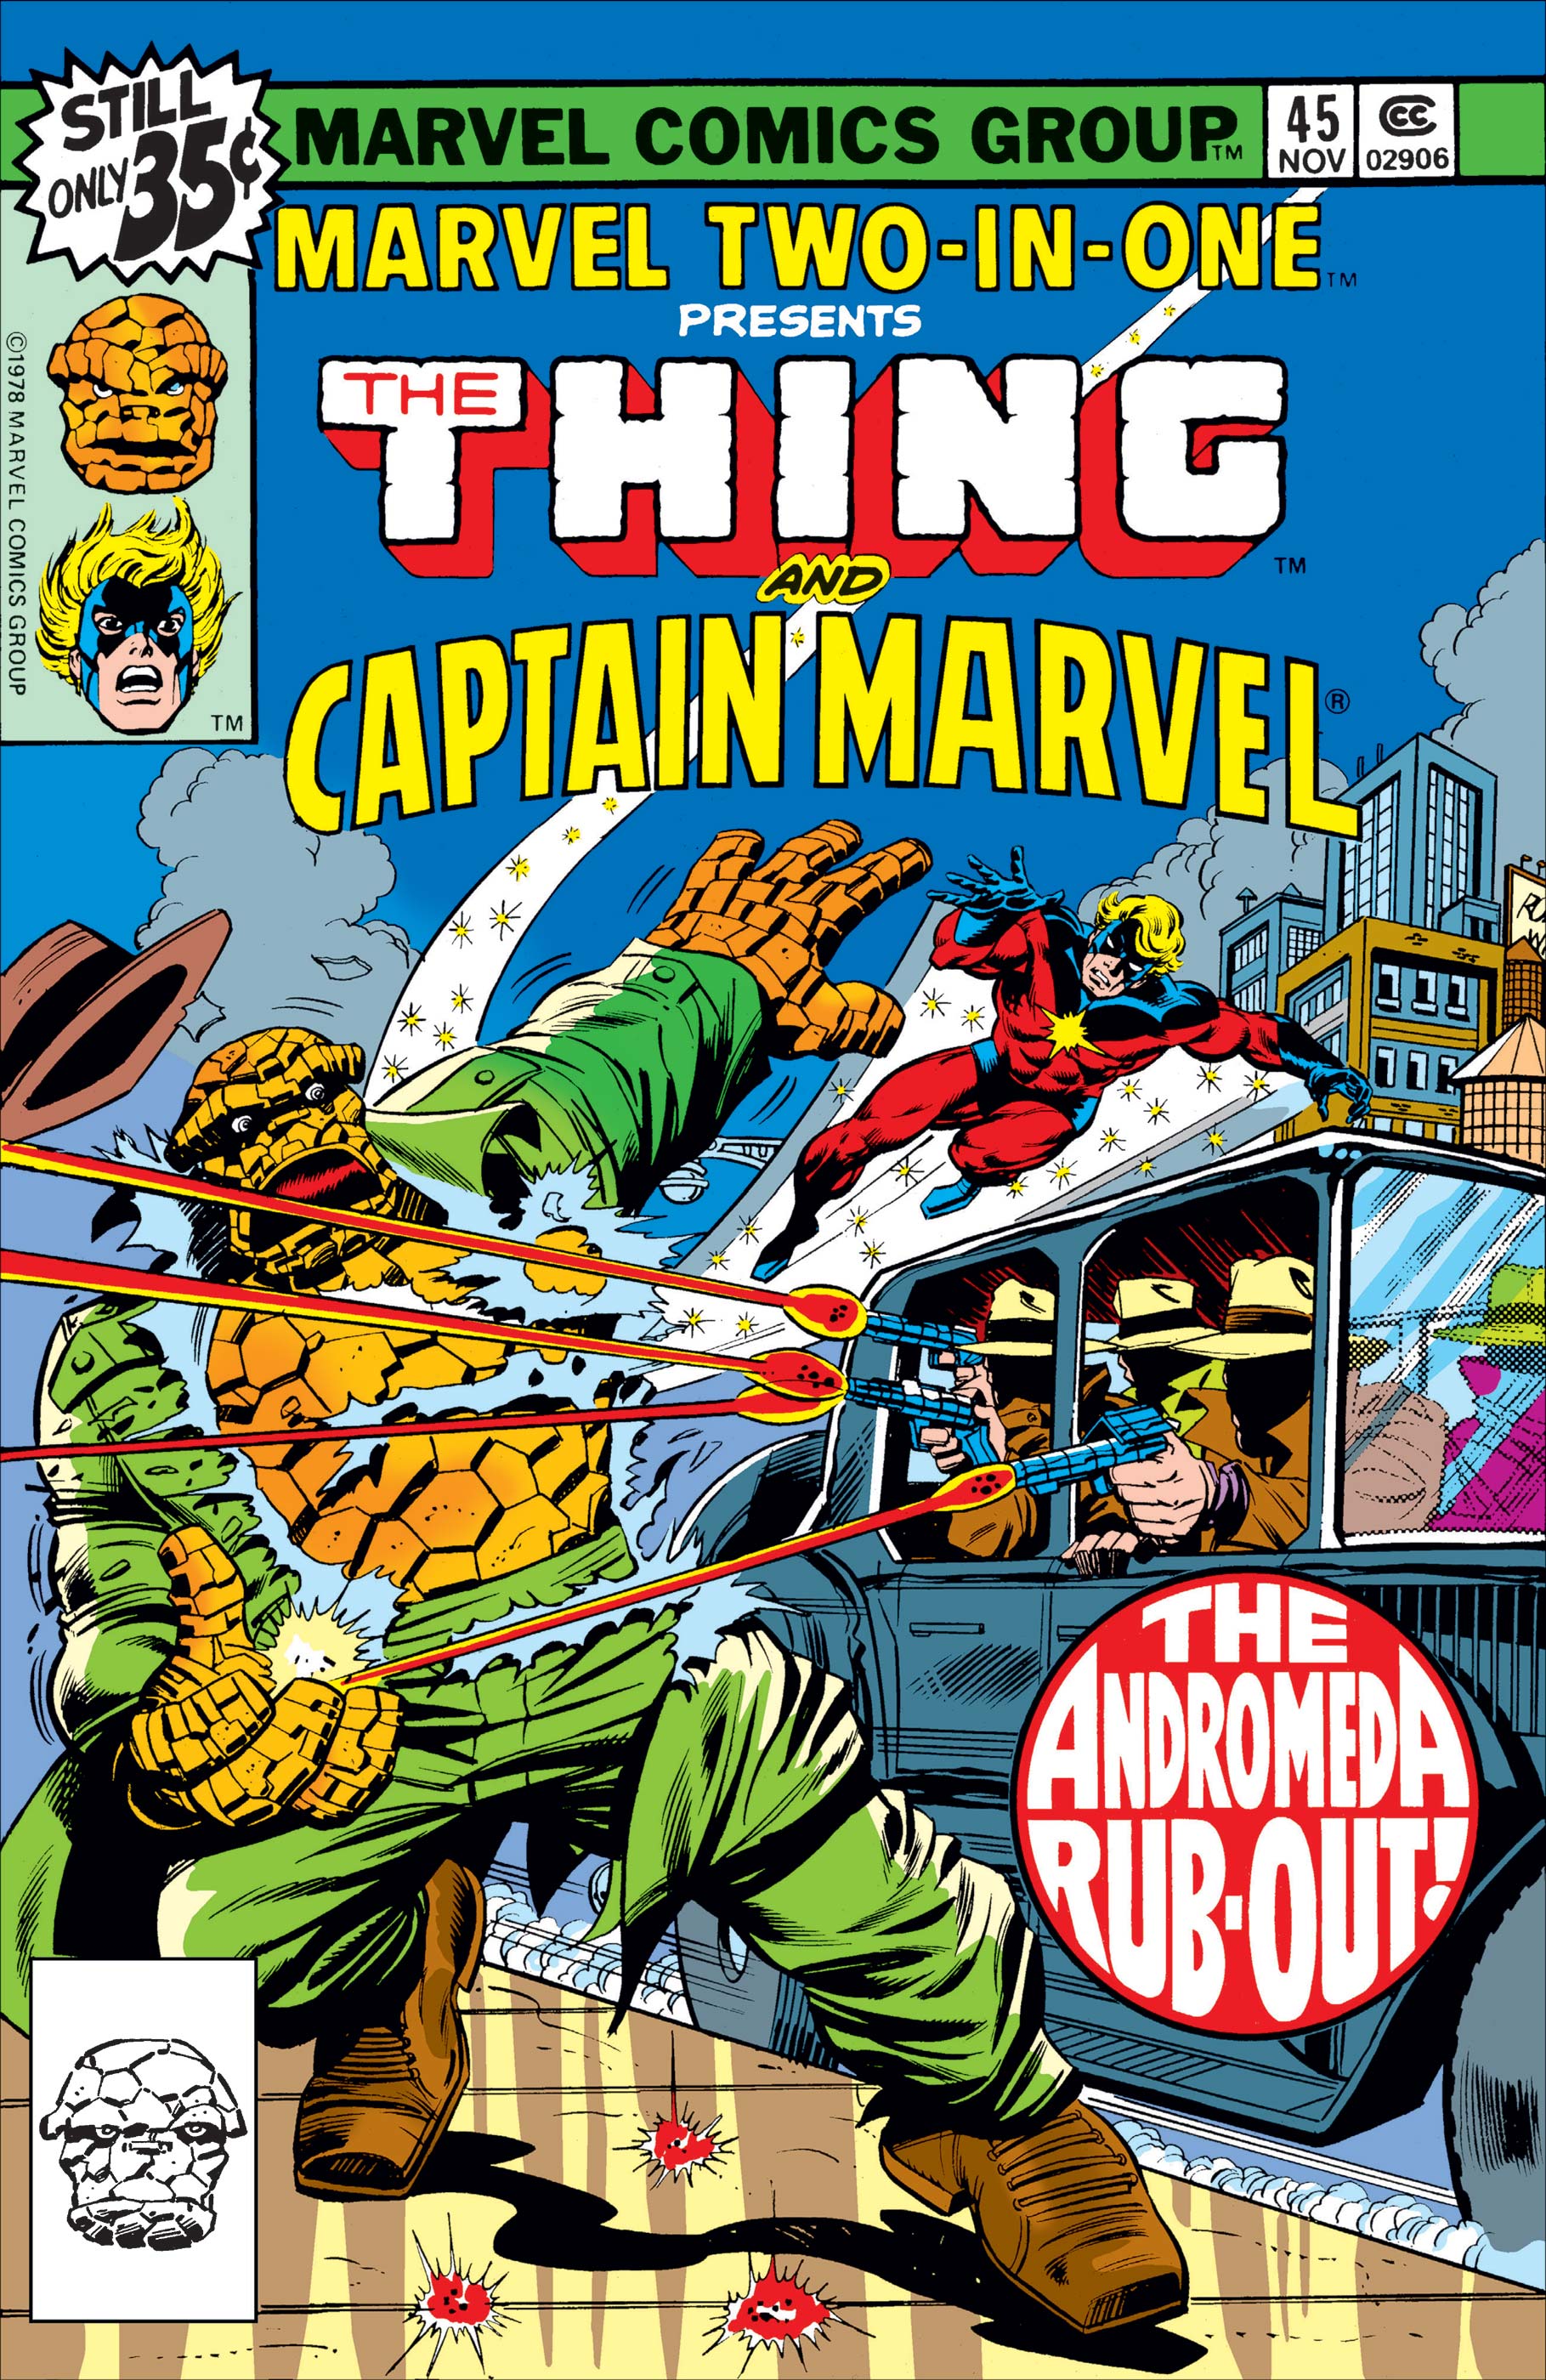 Marvel Two-in-One (1974) #45